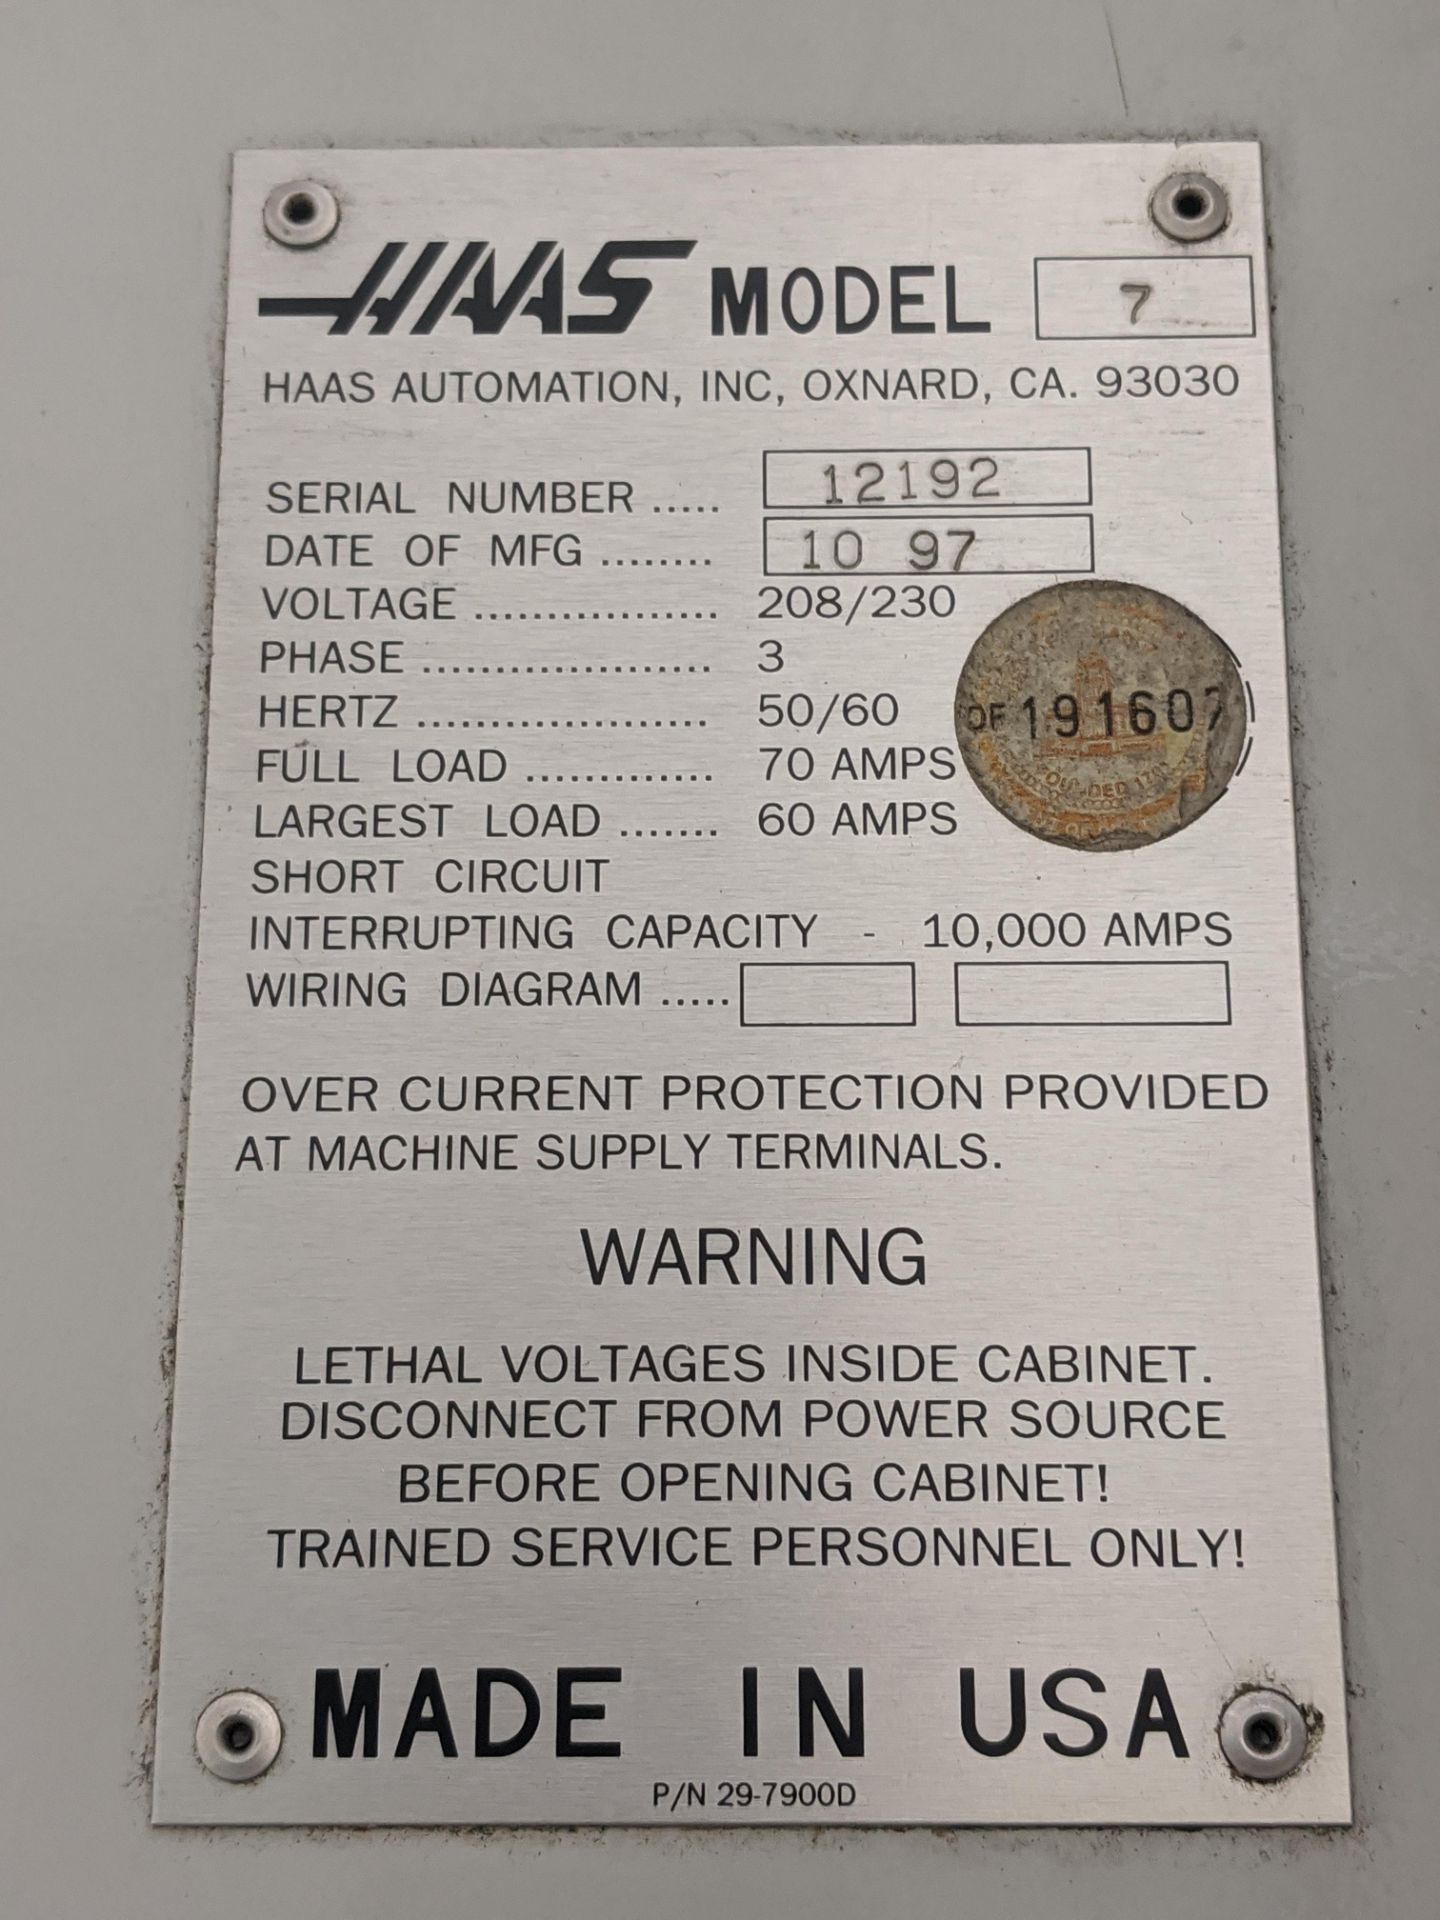 1997 Haas Model VF-7 CNC Vertical Milling Machine - Image 8 of 8